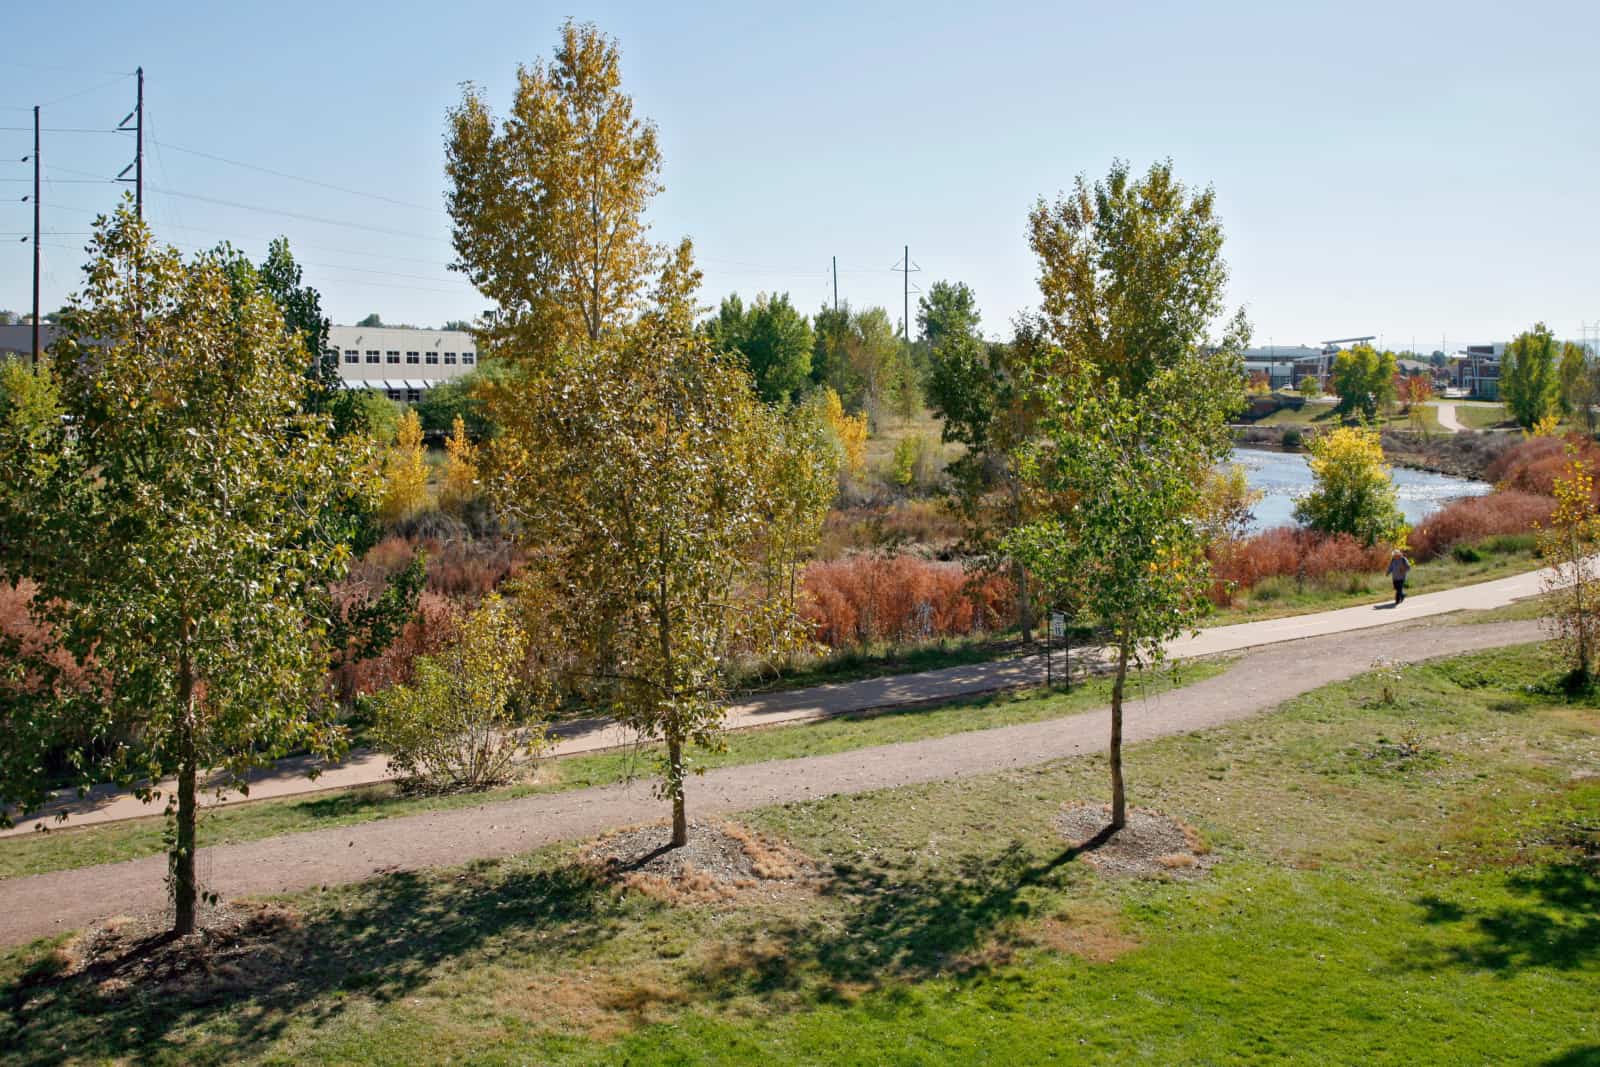 View of the river and walking path surrounded by trees and other vegetation.